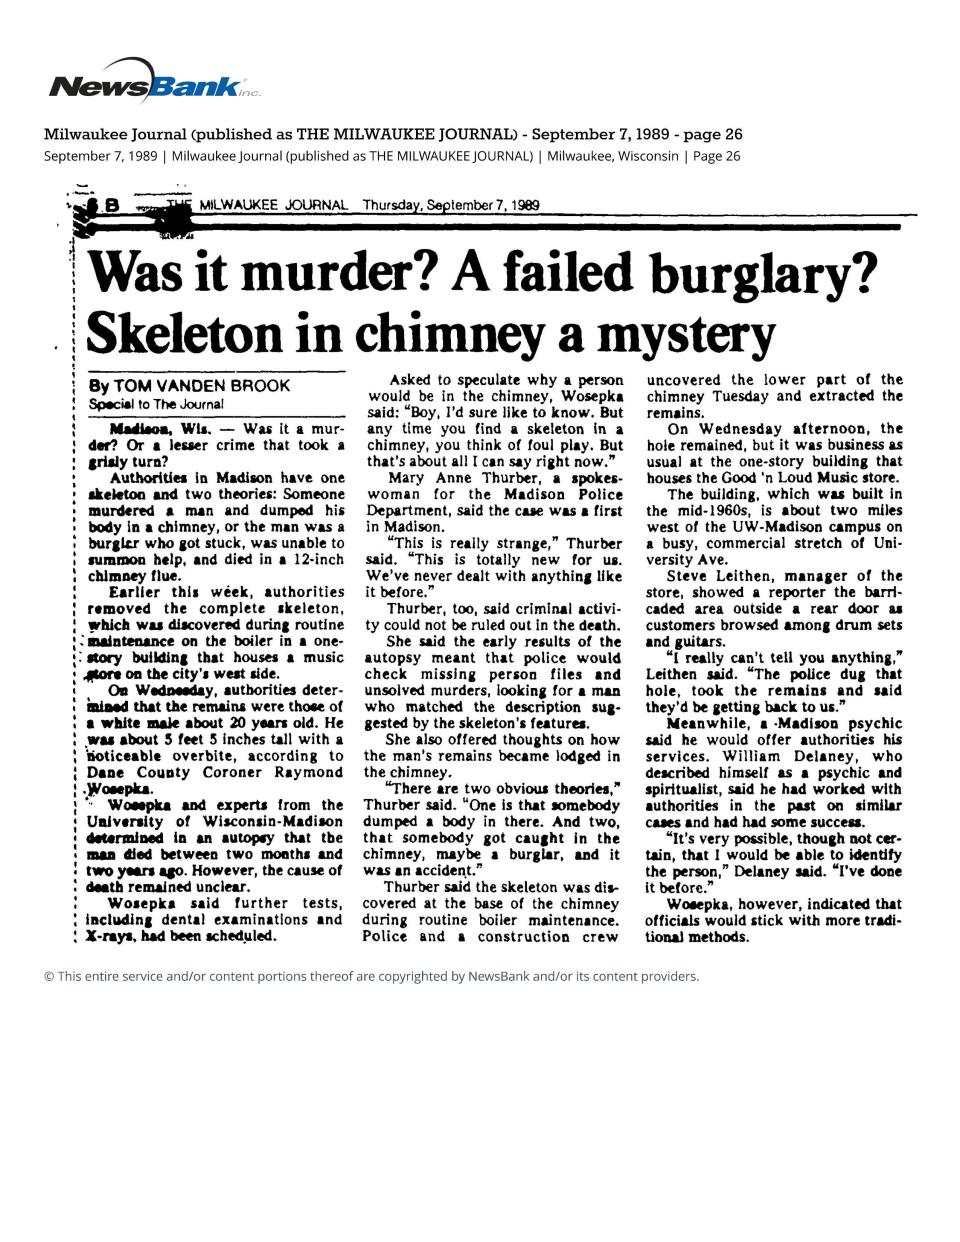 A Sept. 7, 1989 Milwaukee Journal article on the remains found in a Madison building's chimney.